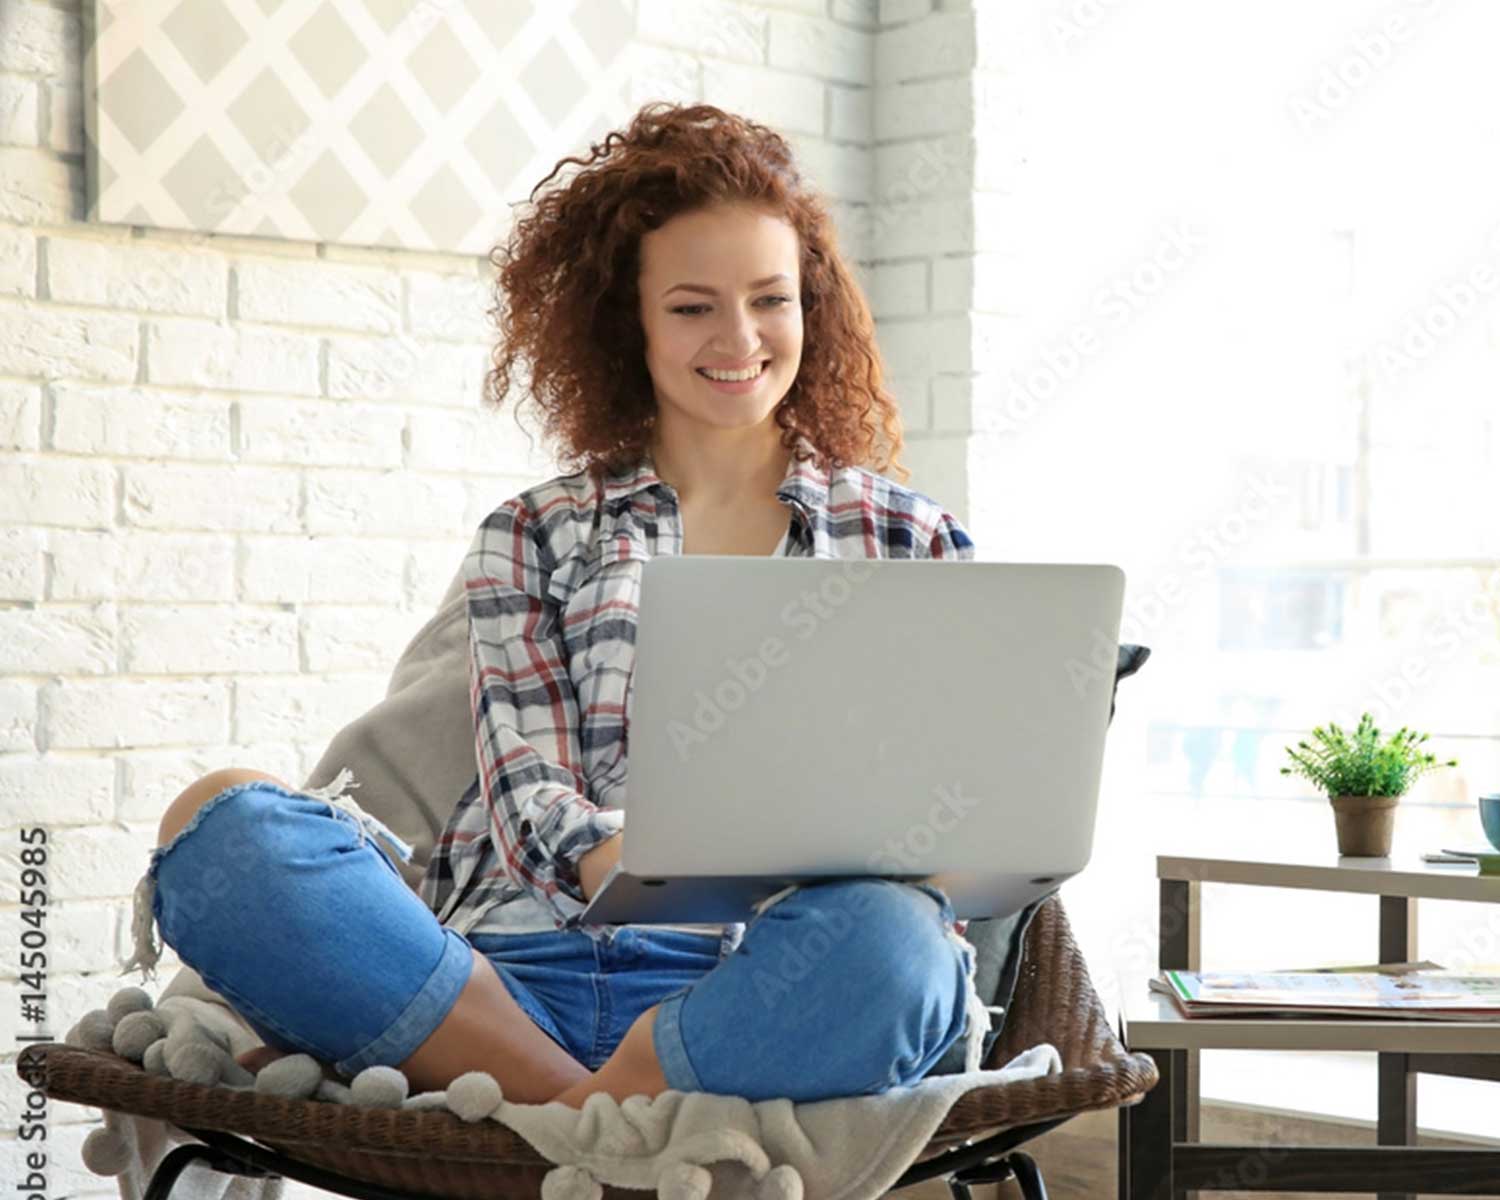 woman sitting and shopping online | online ordering and ecommerce